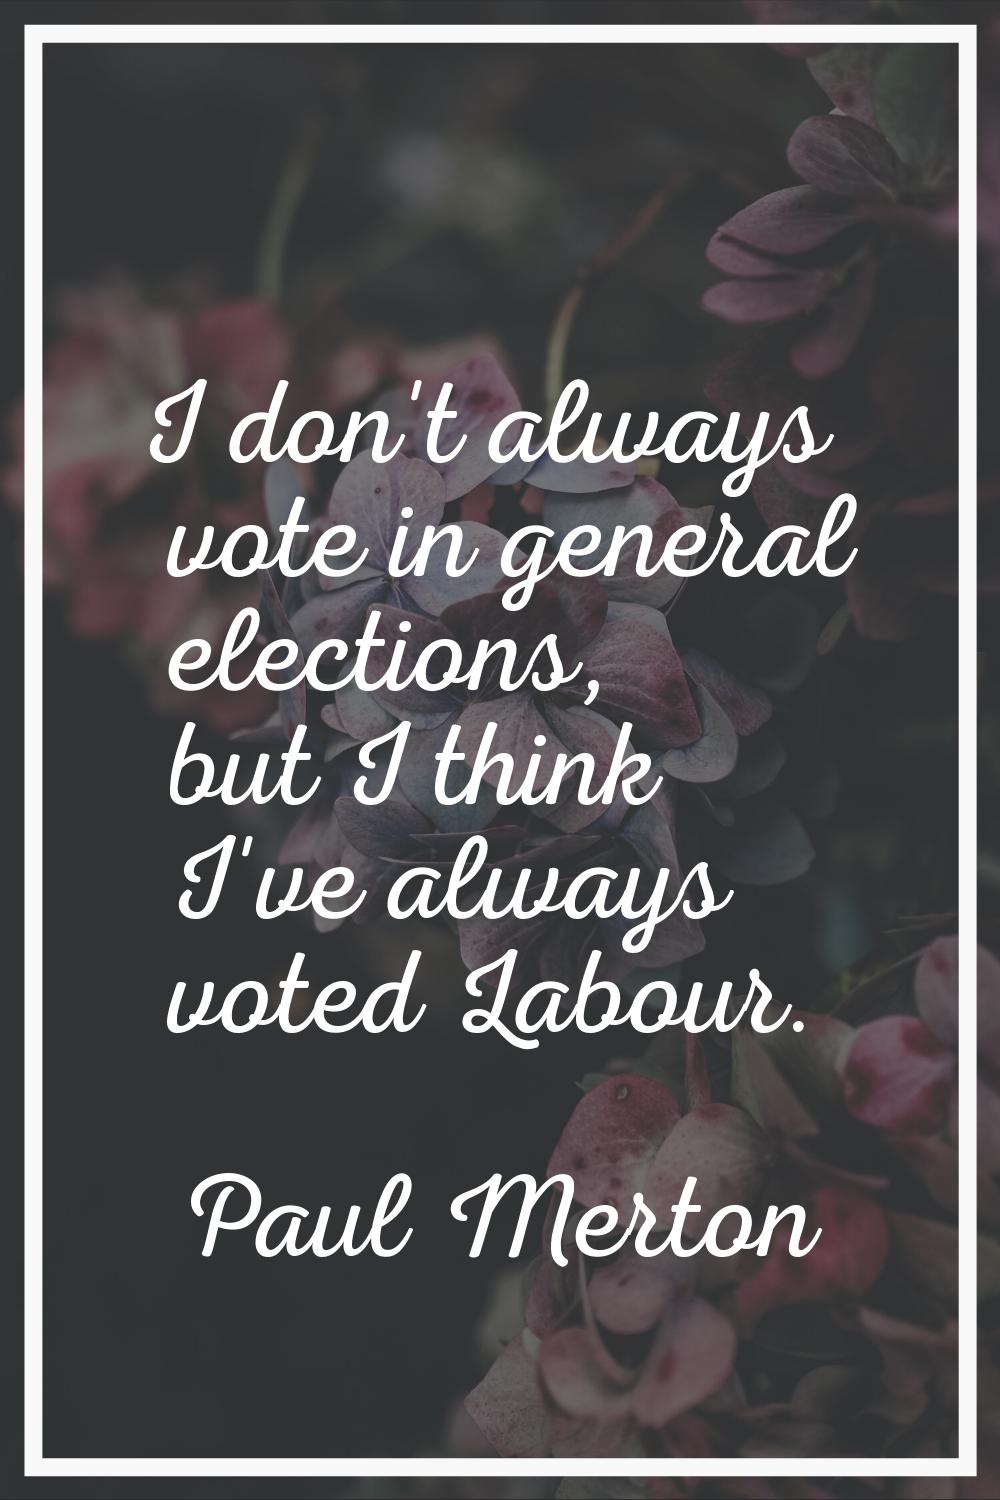 I don't always vote in general elections, but I think I've always voted Labour.